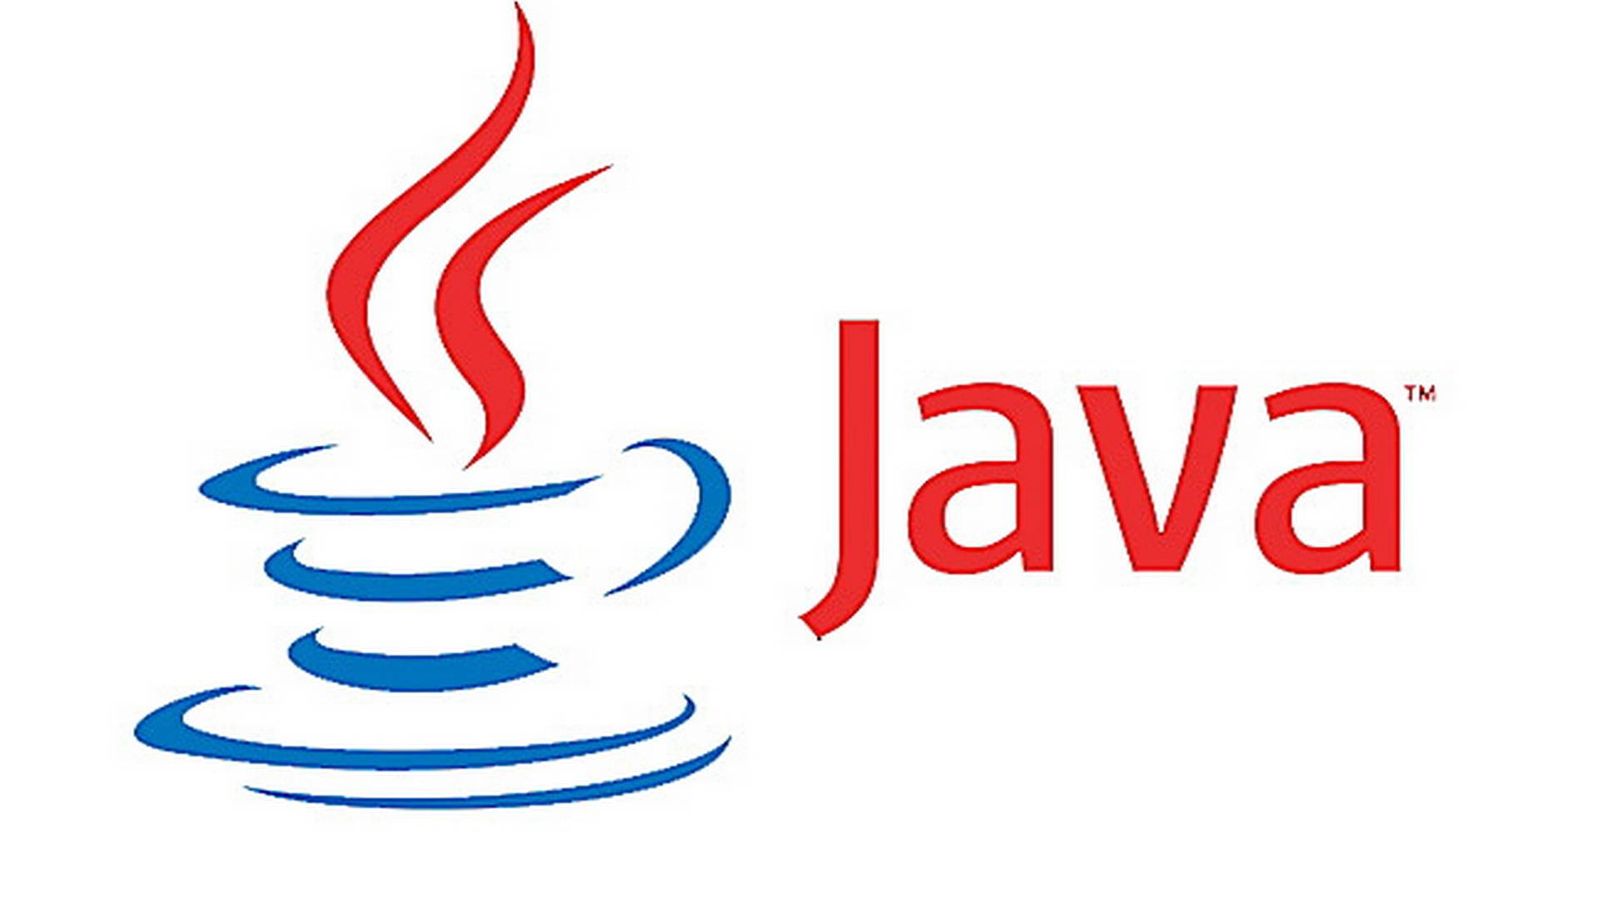 A practical of applying Java Modules in a Hexagonal Architecture